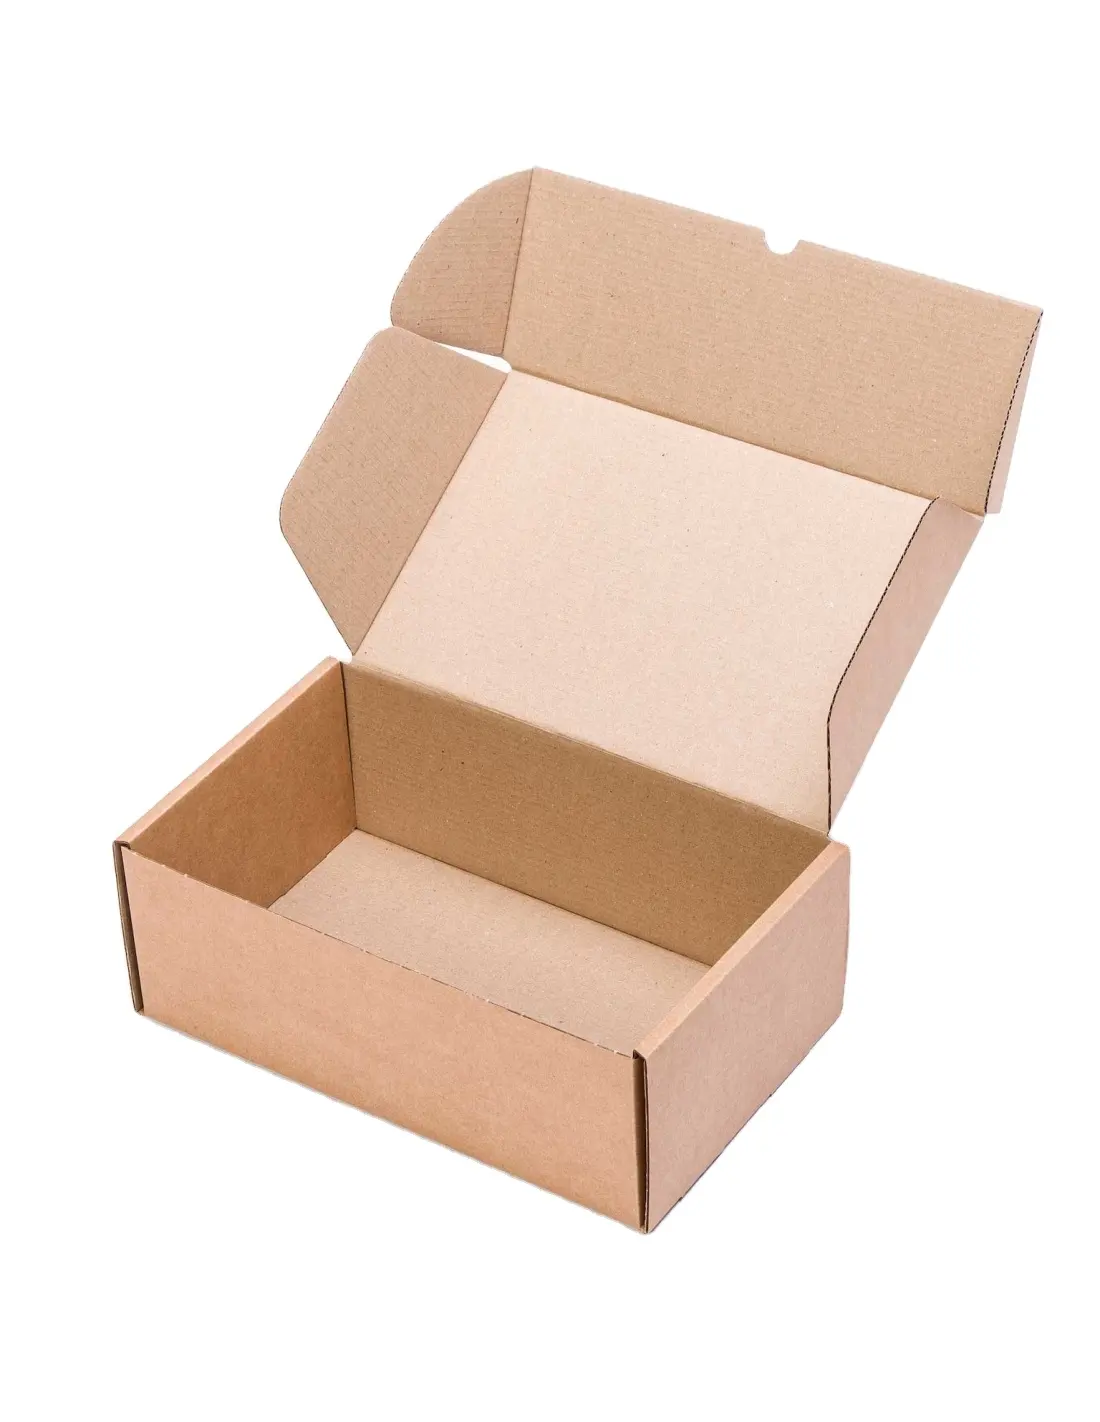 High Quality 34,5x21x12,5 cms Strong Self assembly Shoe Cardboard Boxes for protection on shipments and postal sendings